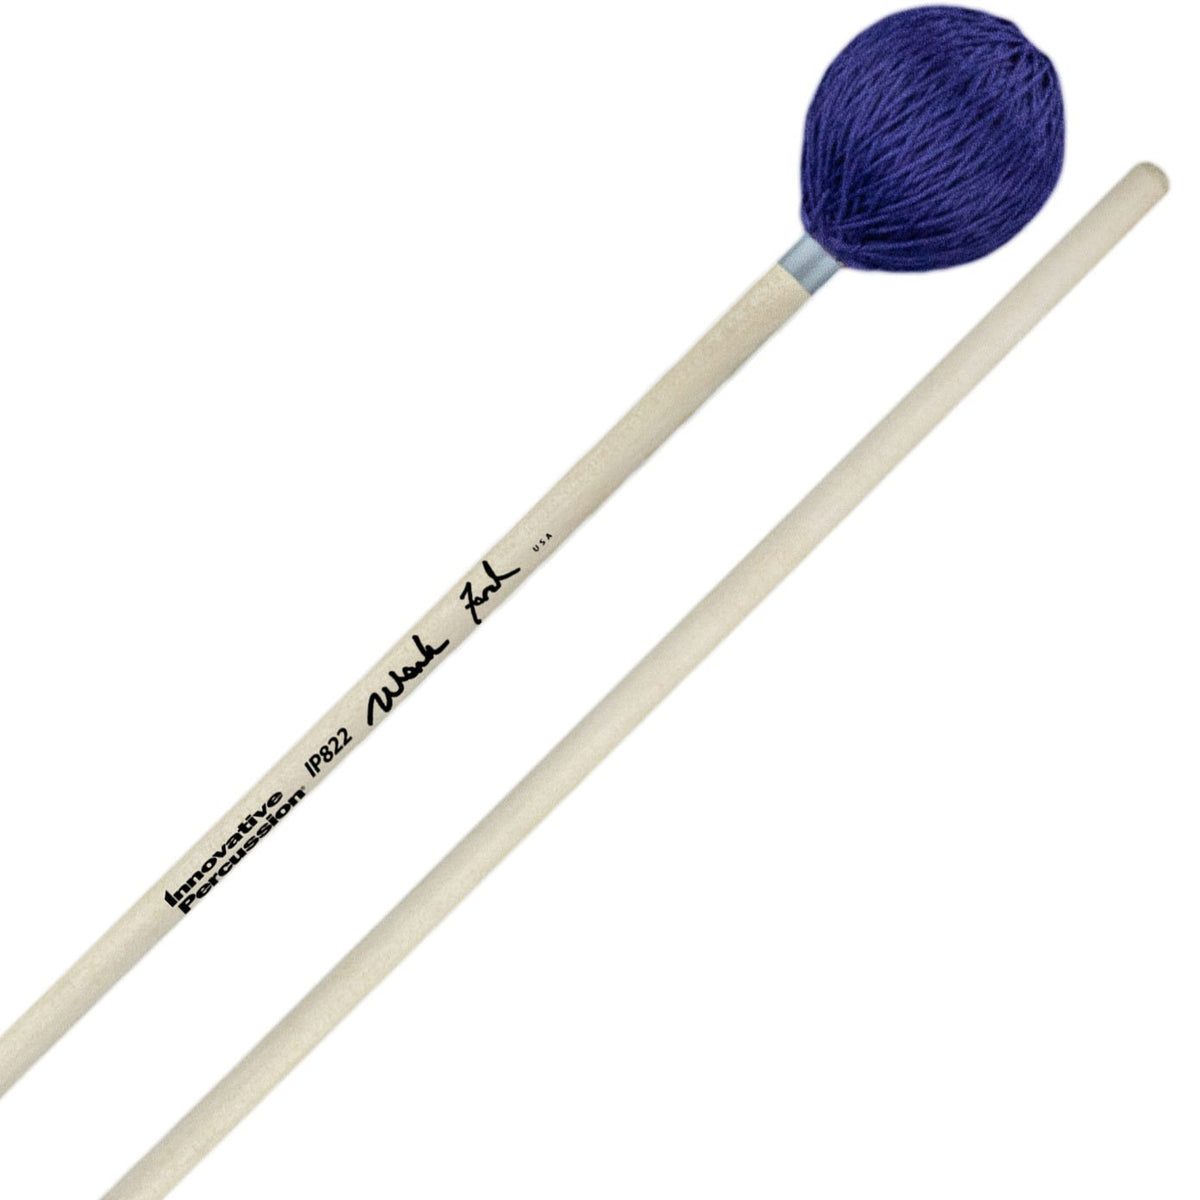 Innovative Percussion - Mark Ford (Strong Legato) Series Concert Marimba Mallets-Percussion-Innovative Percussion-Rhapsody IP822: Articulate Medium Hard-Music Elements